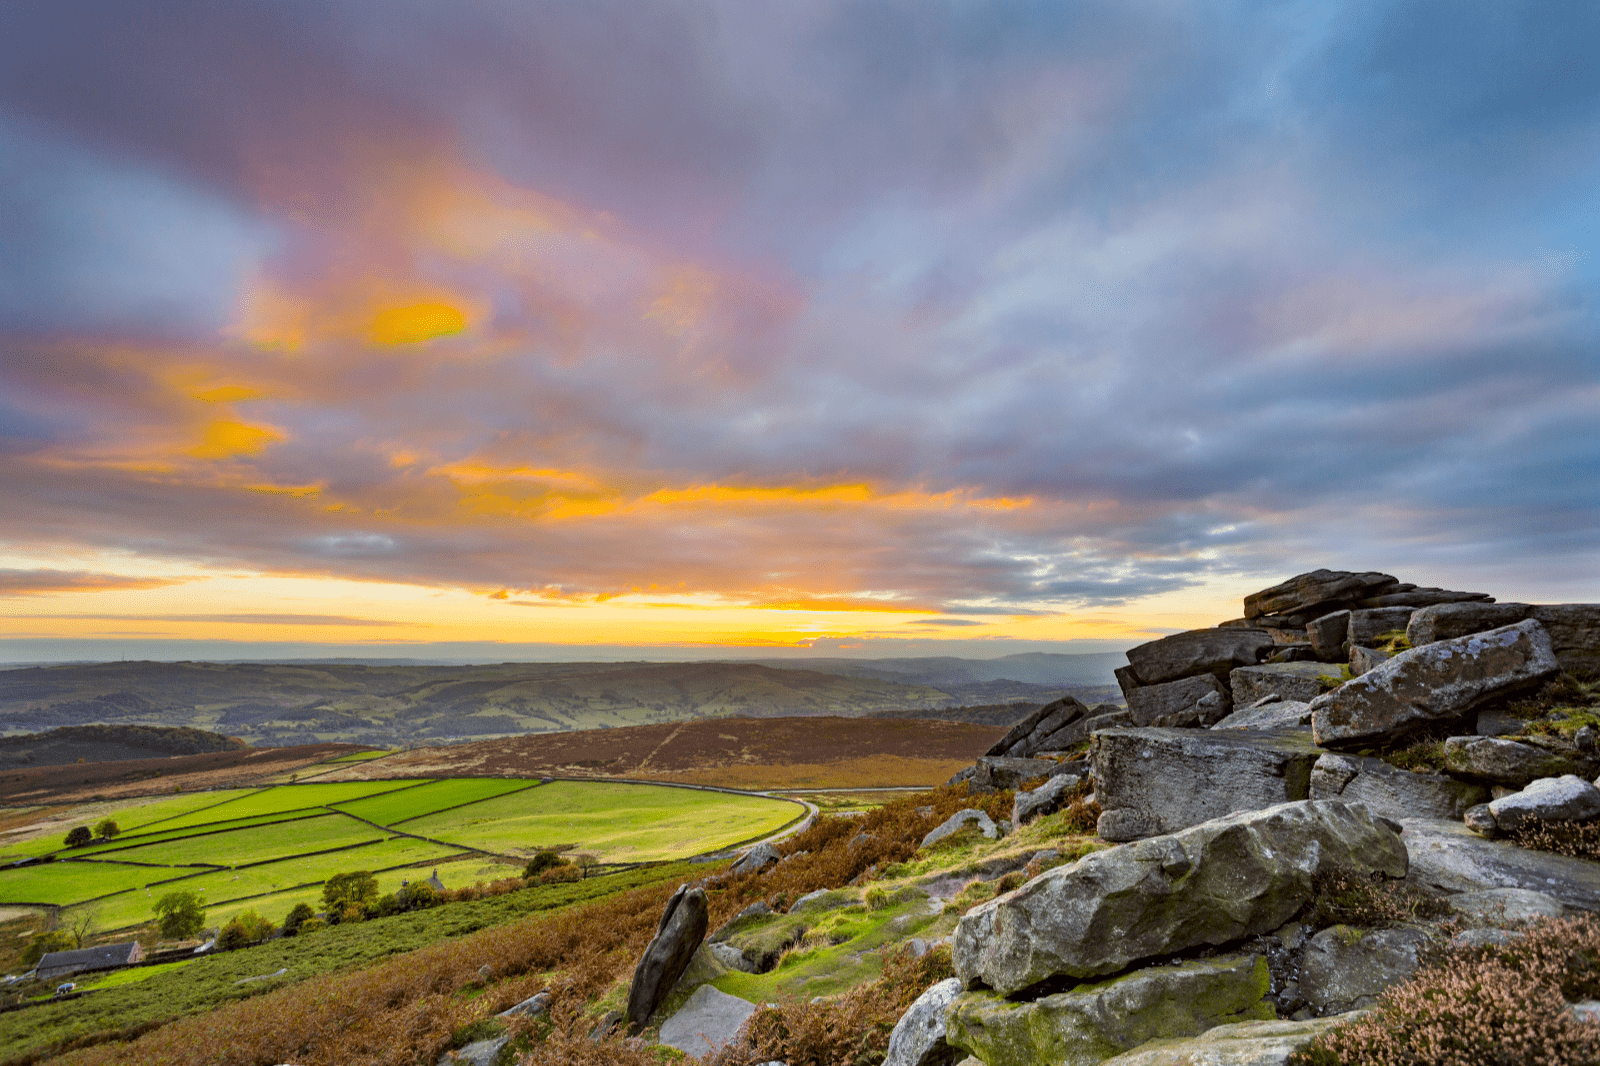 Peak district view with sky